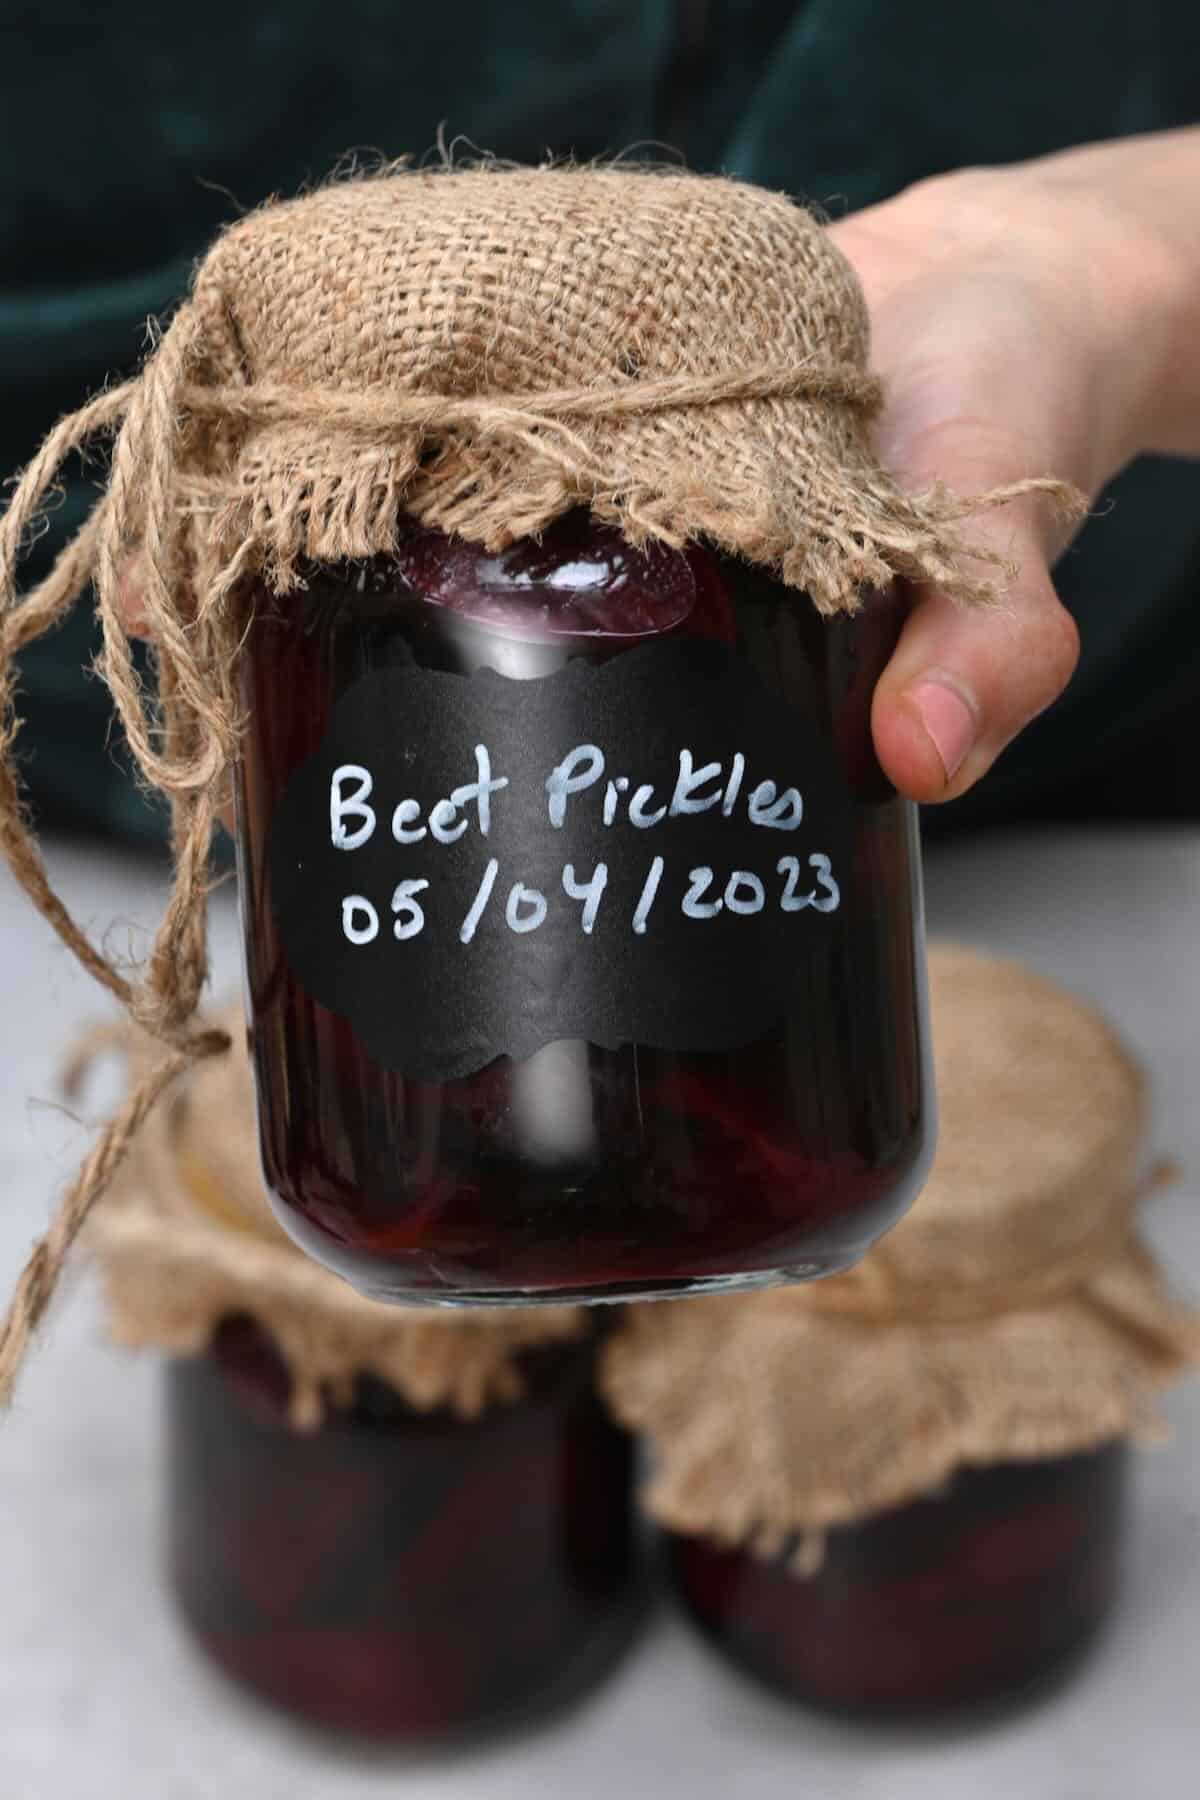 A jar with beet pickles